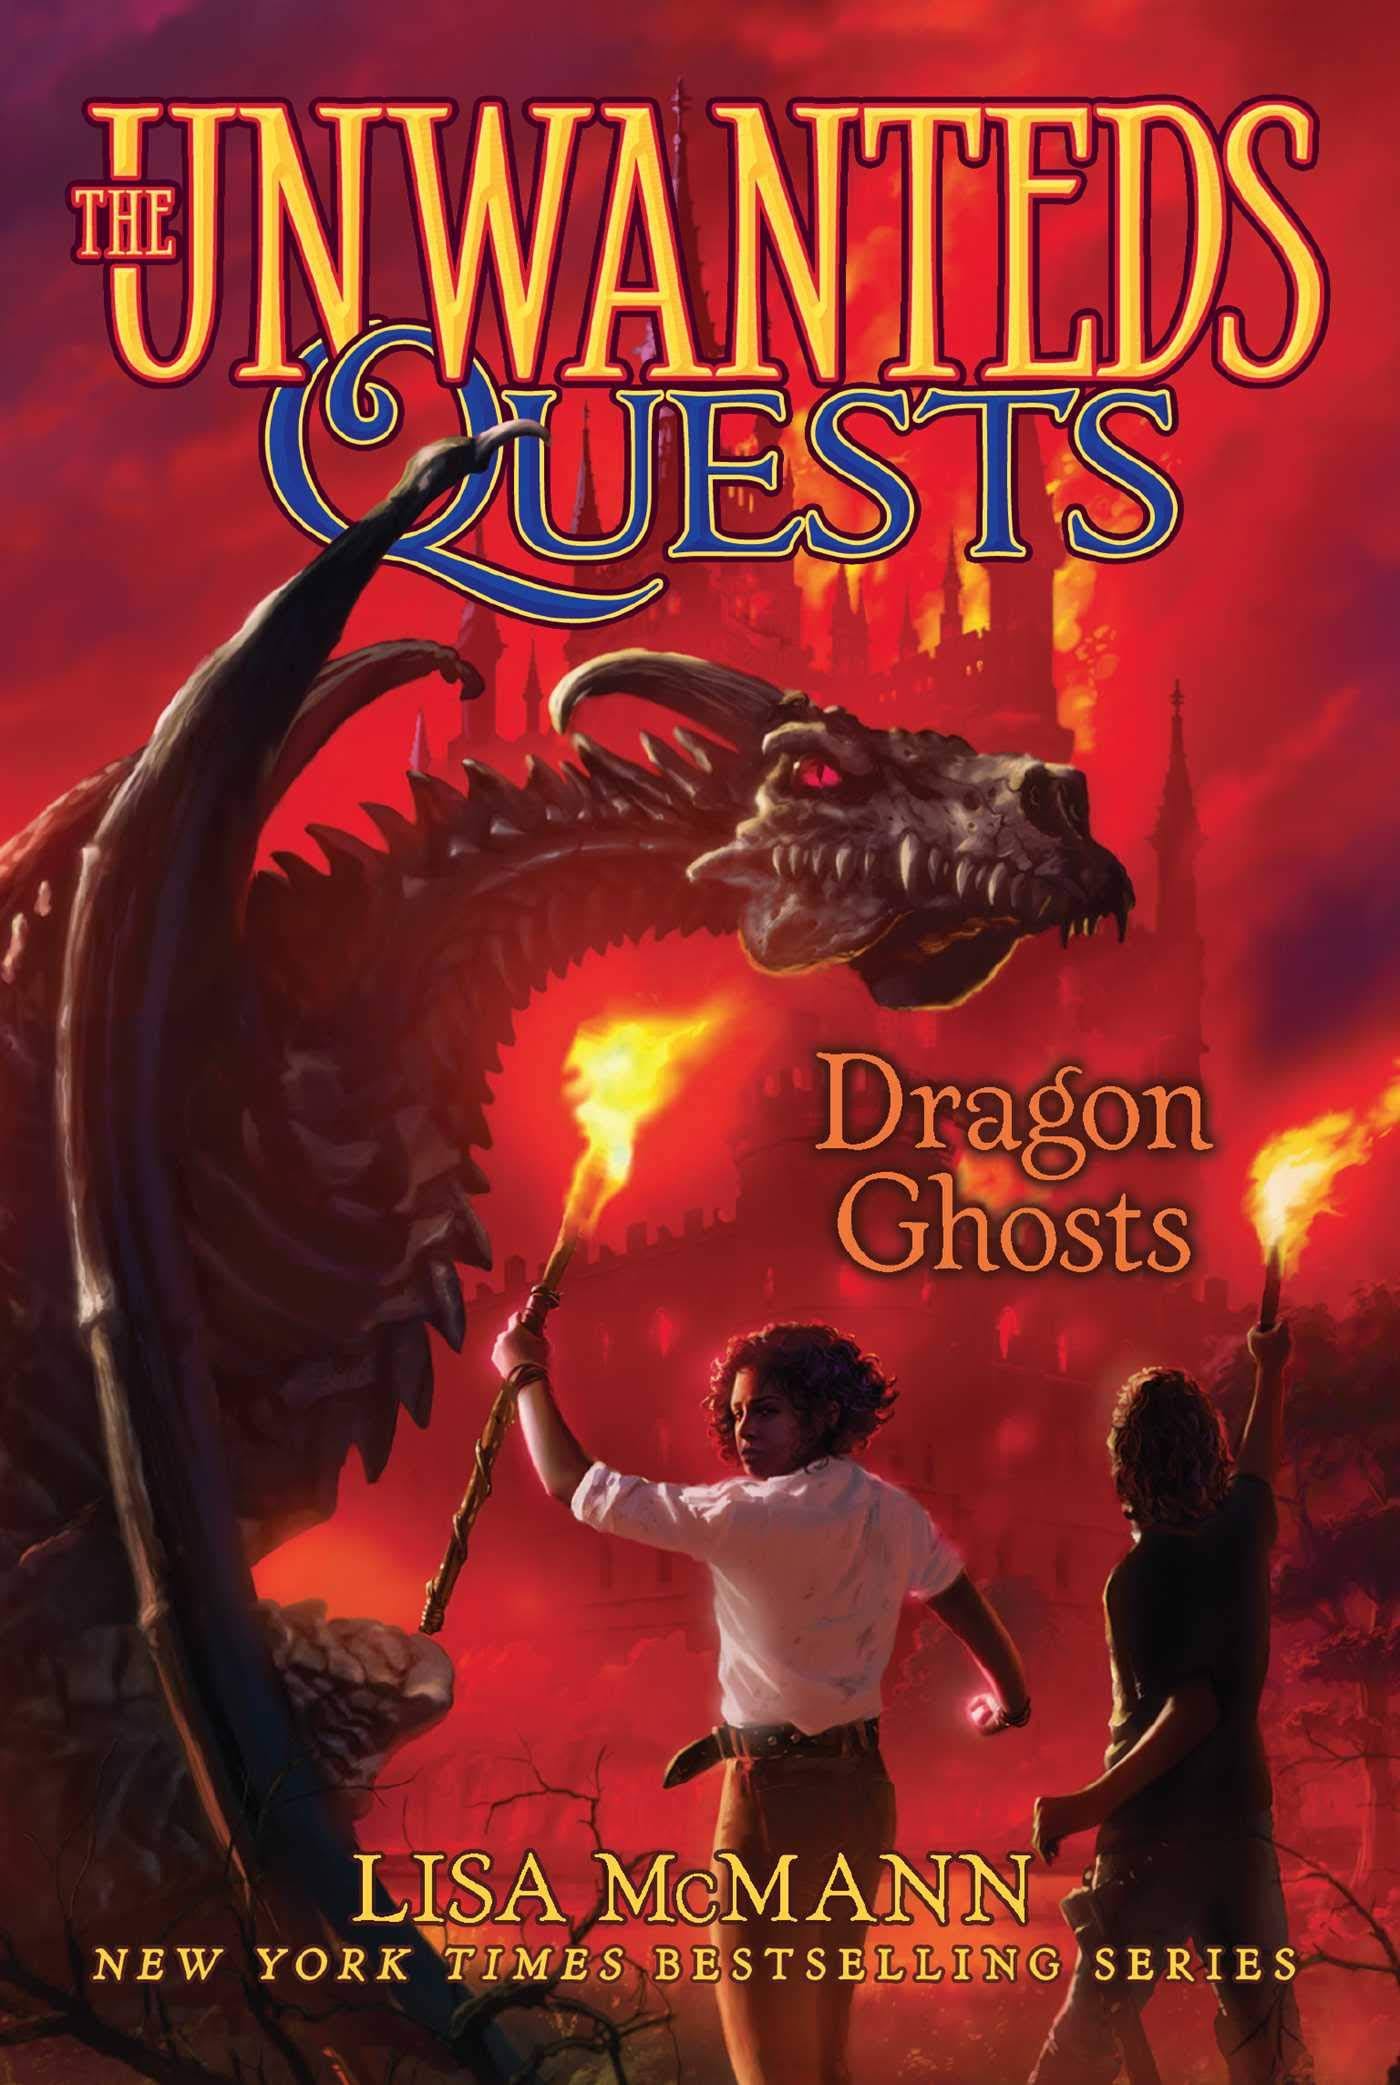 Dragon Ghosts [Book]